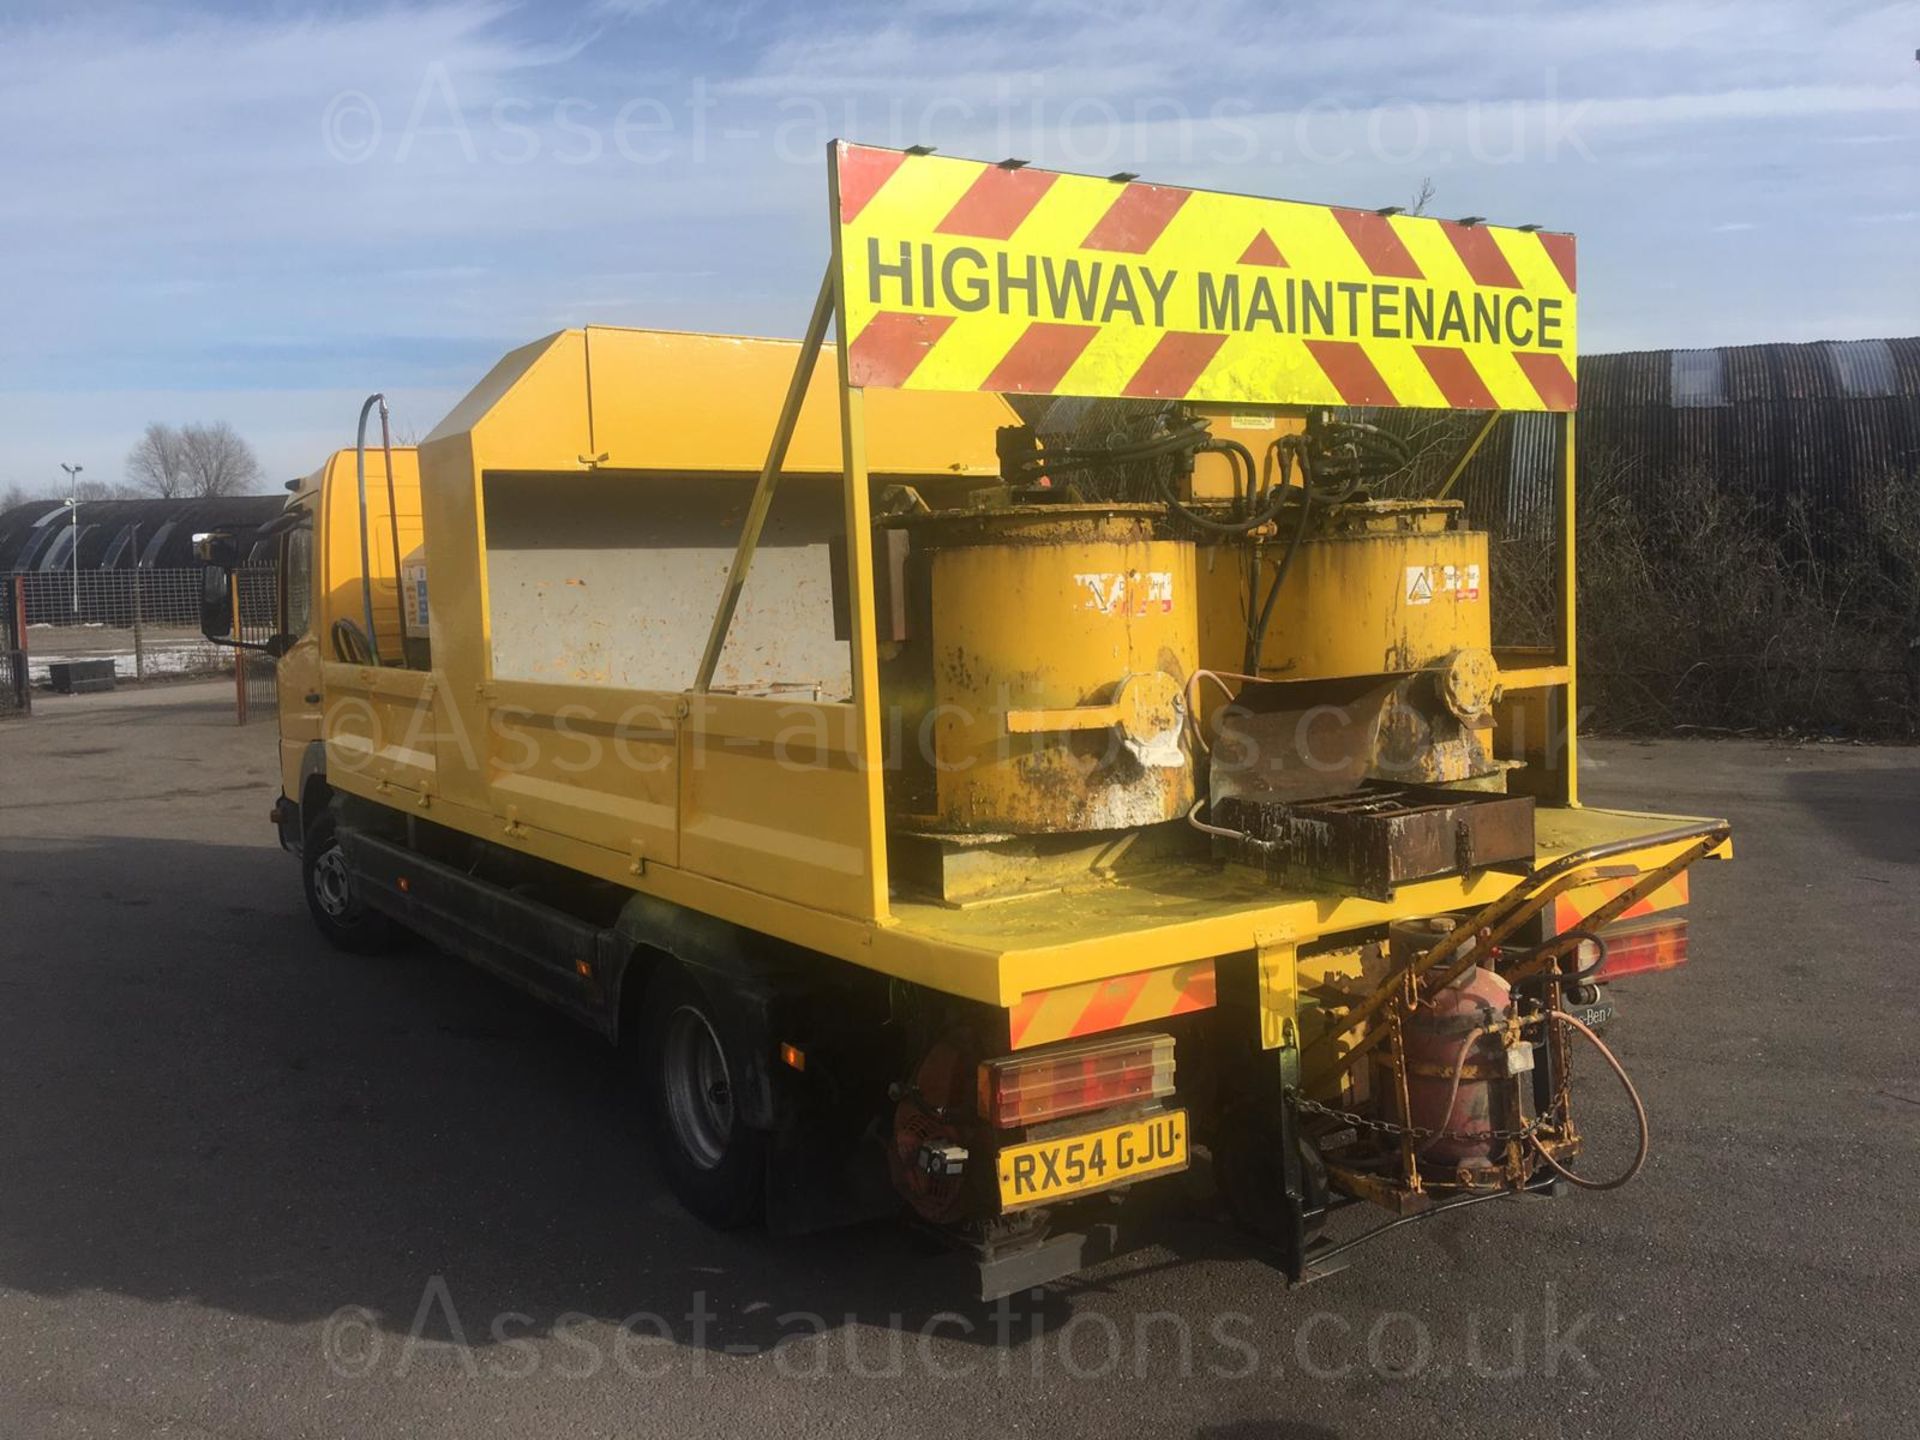 2004/54 REG MERCEDES ATEGO 1018 DAY YELLOW DROPSIDE LINE PAINTING LORRY 4.3L DIESEL ENGINE *NO VAT* - Image 9 of 62